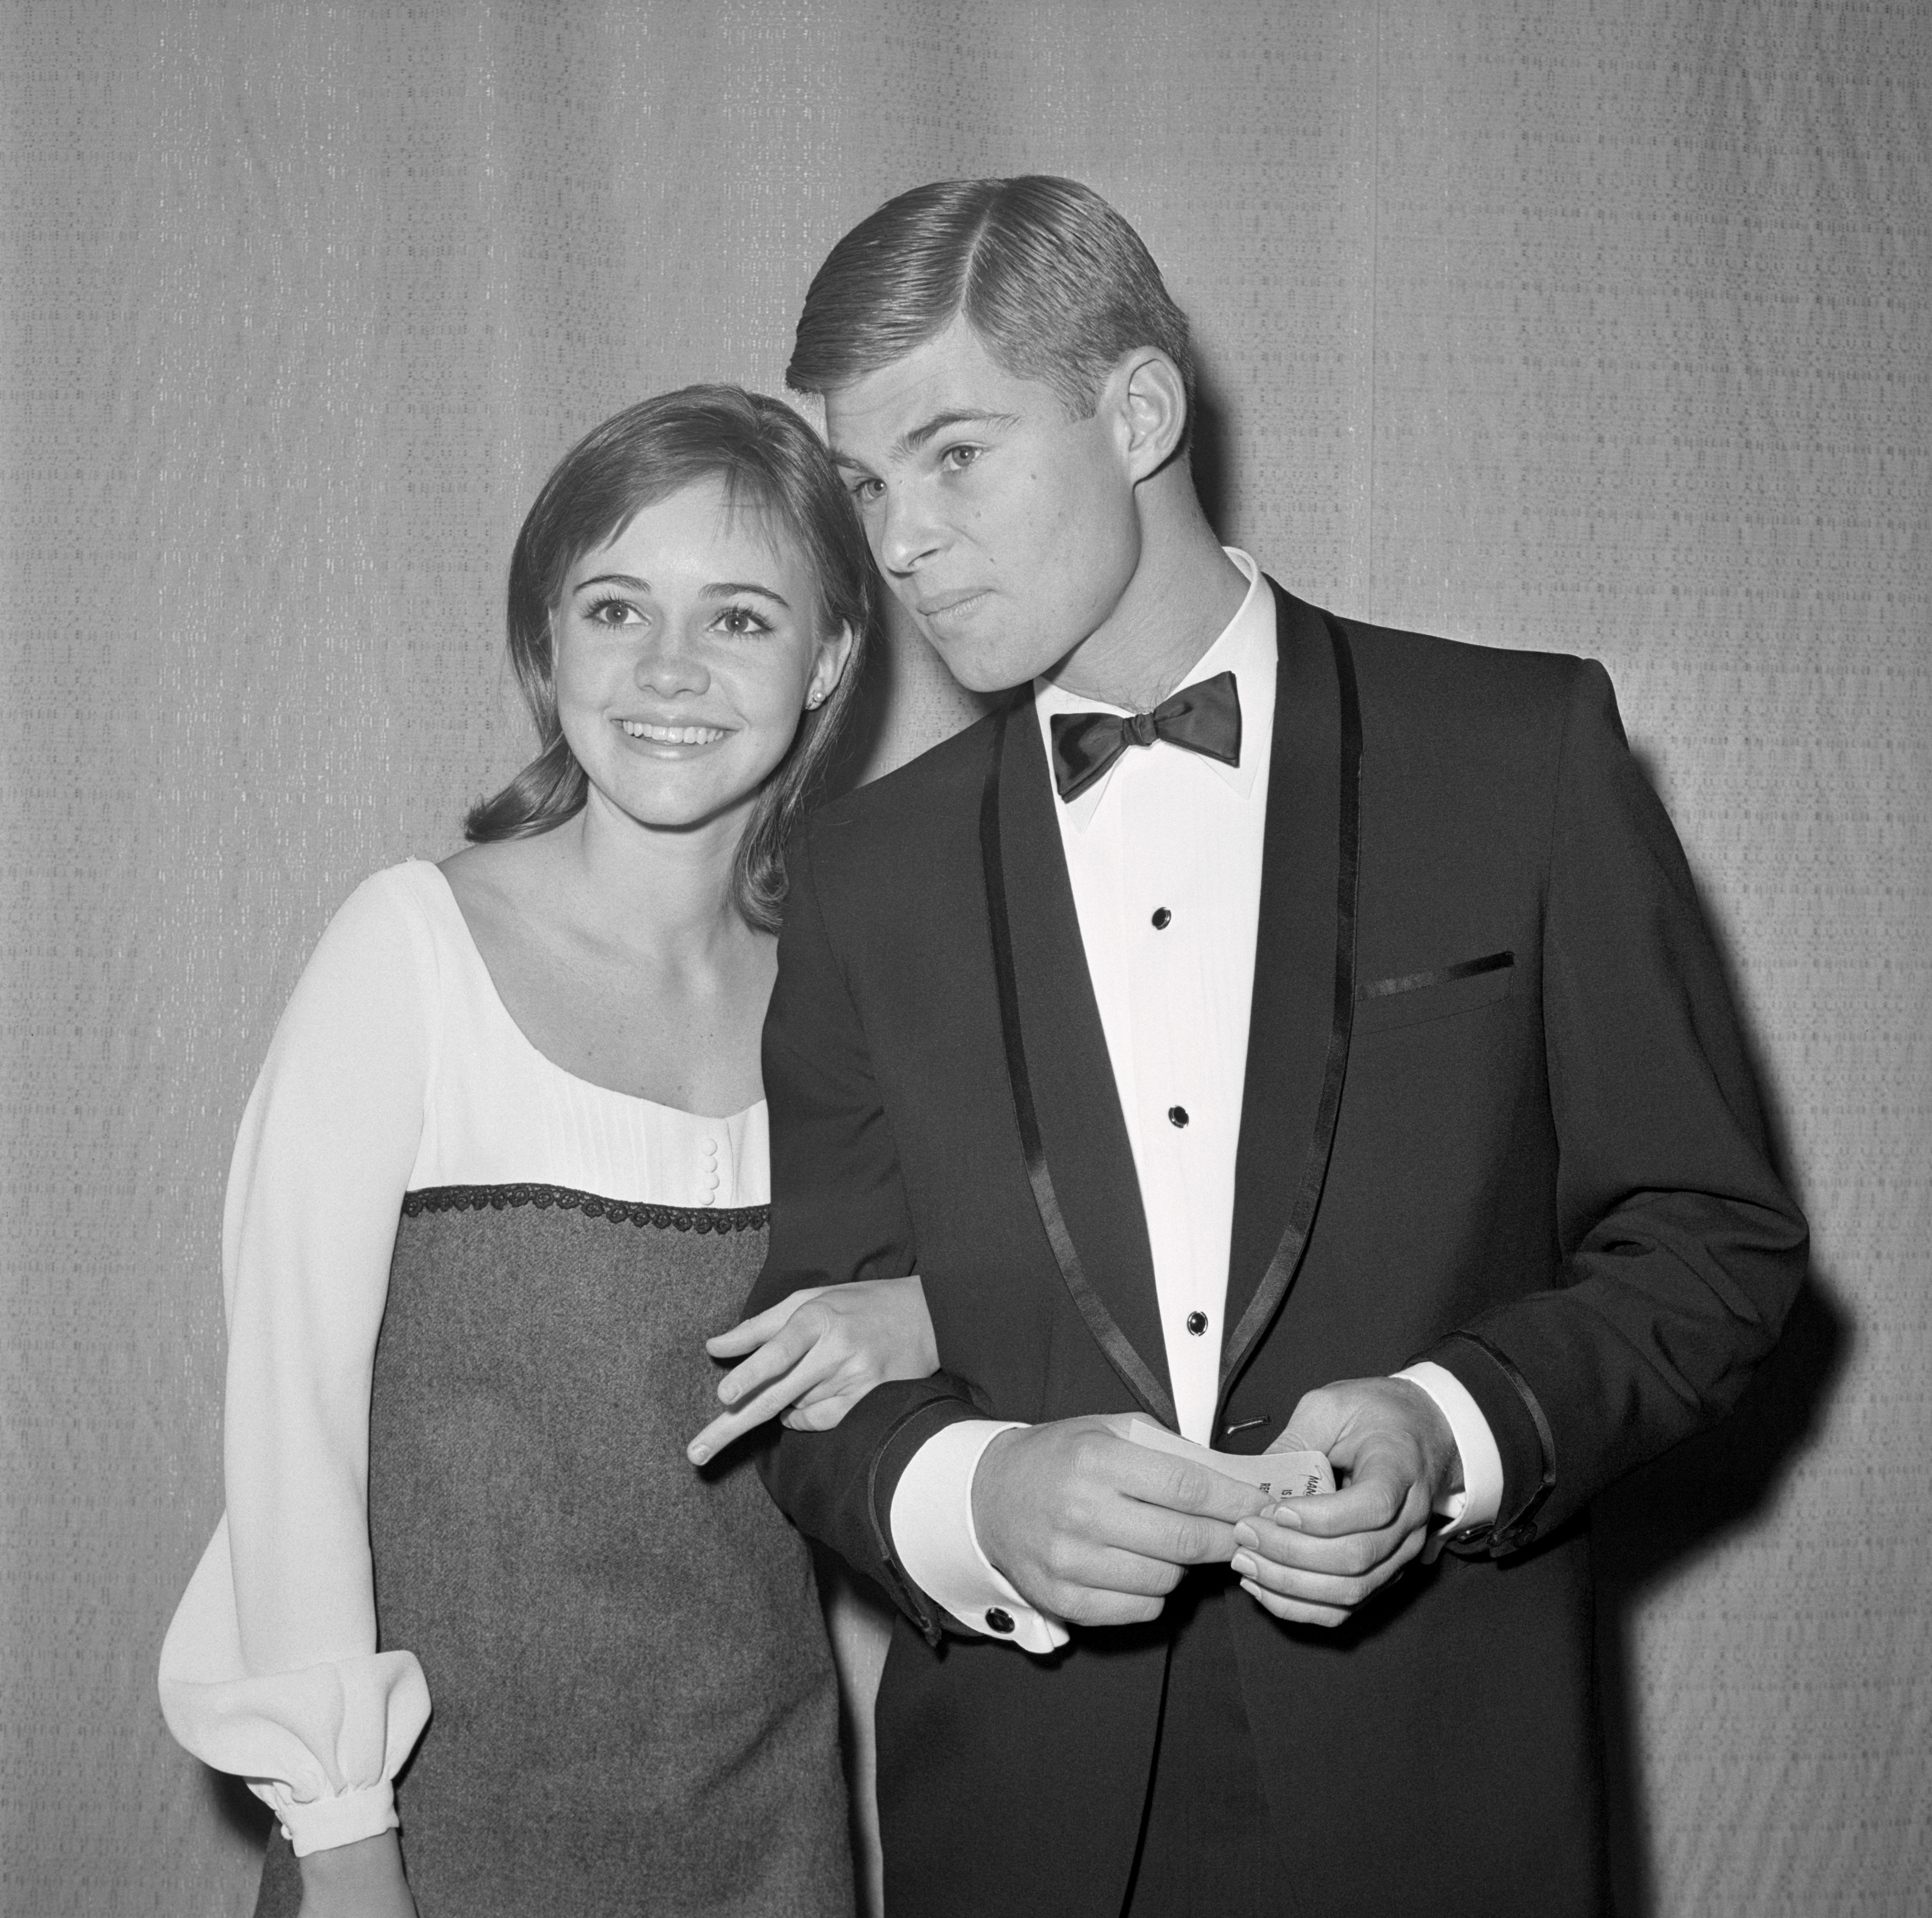 Sally Field and Steve Craig at the premiere of the film "Battle of the Bulge" in Hollywood in 1965 | Source: Getty Images